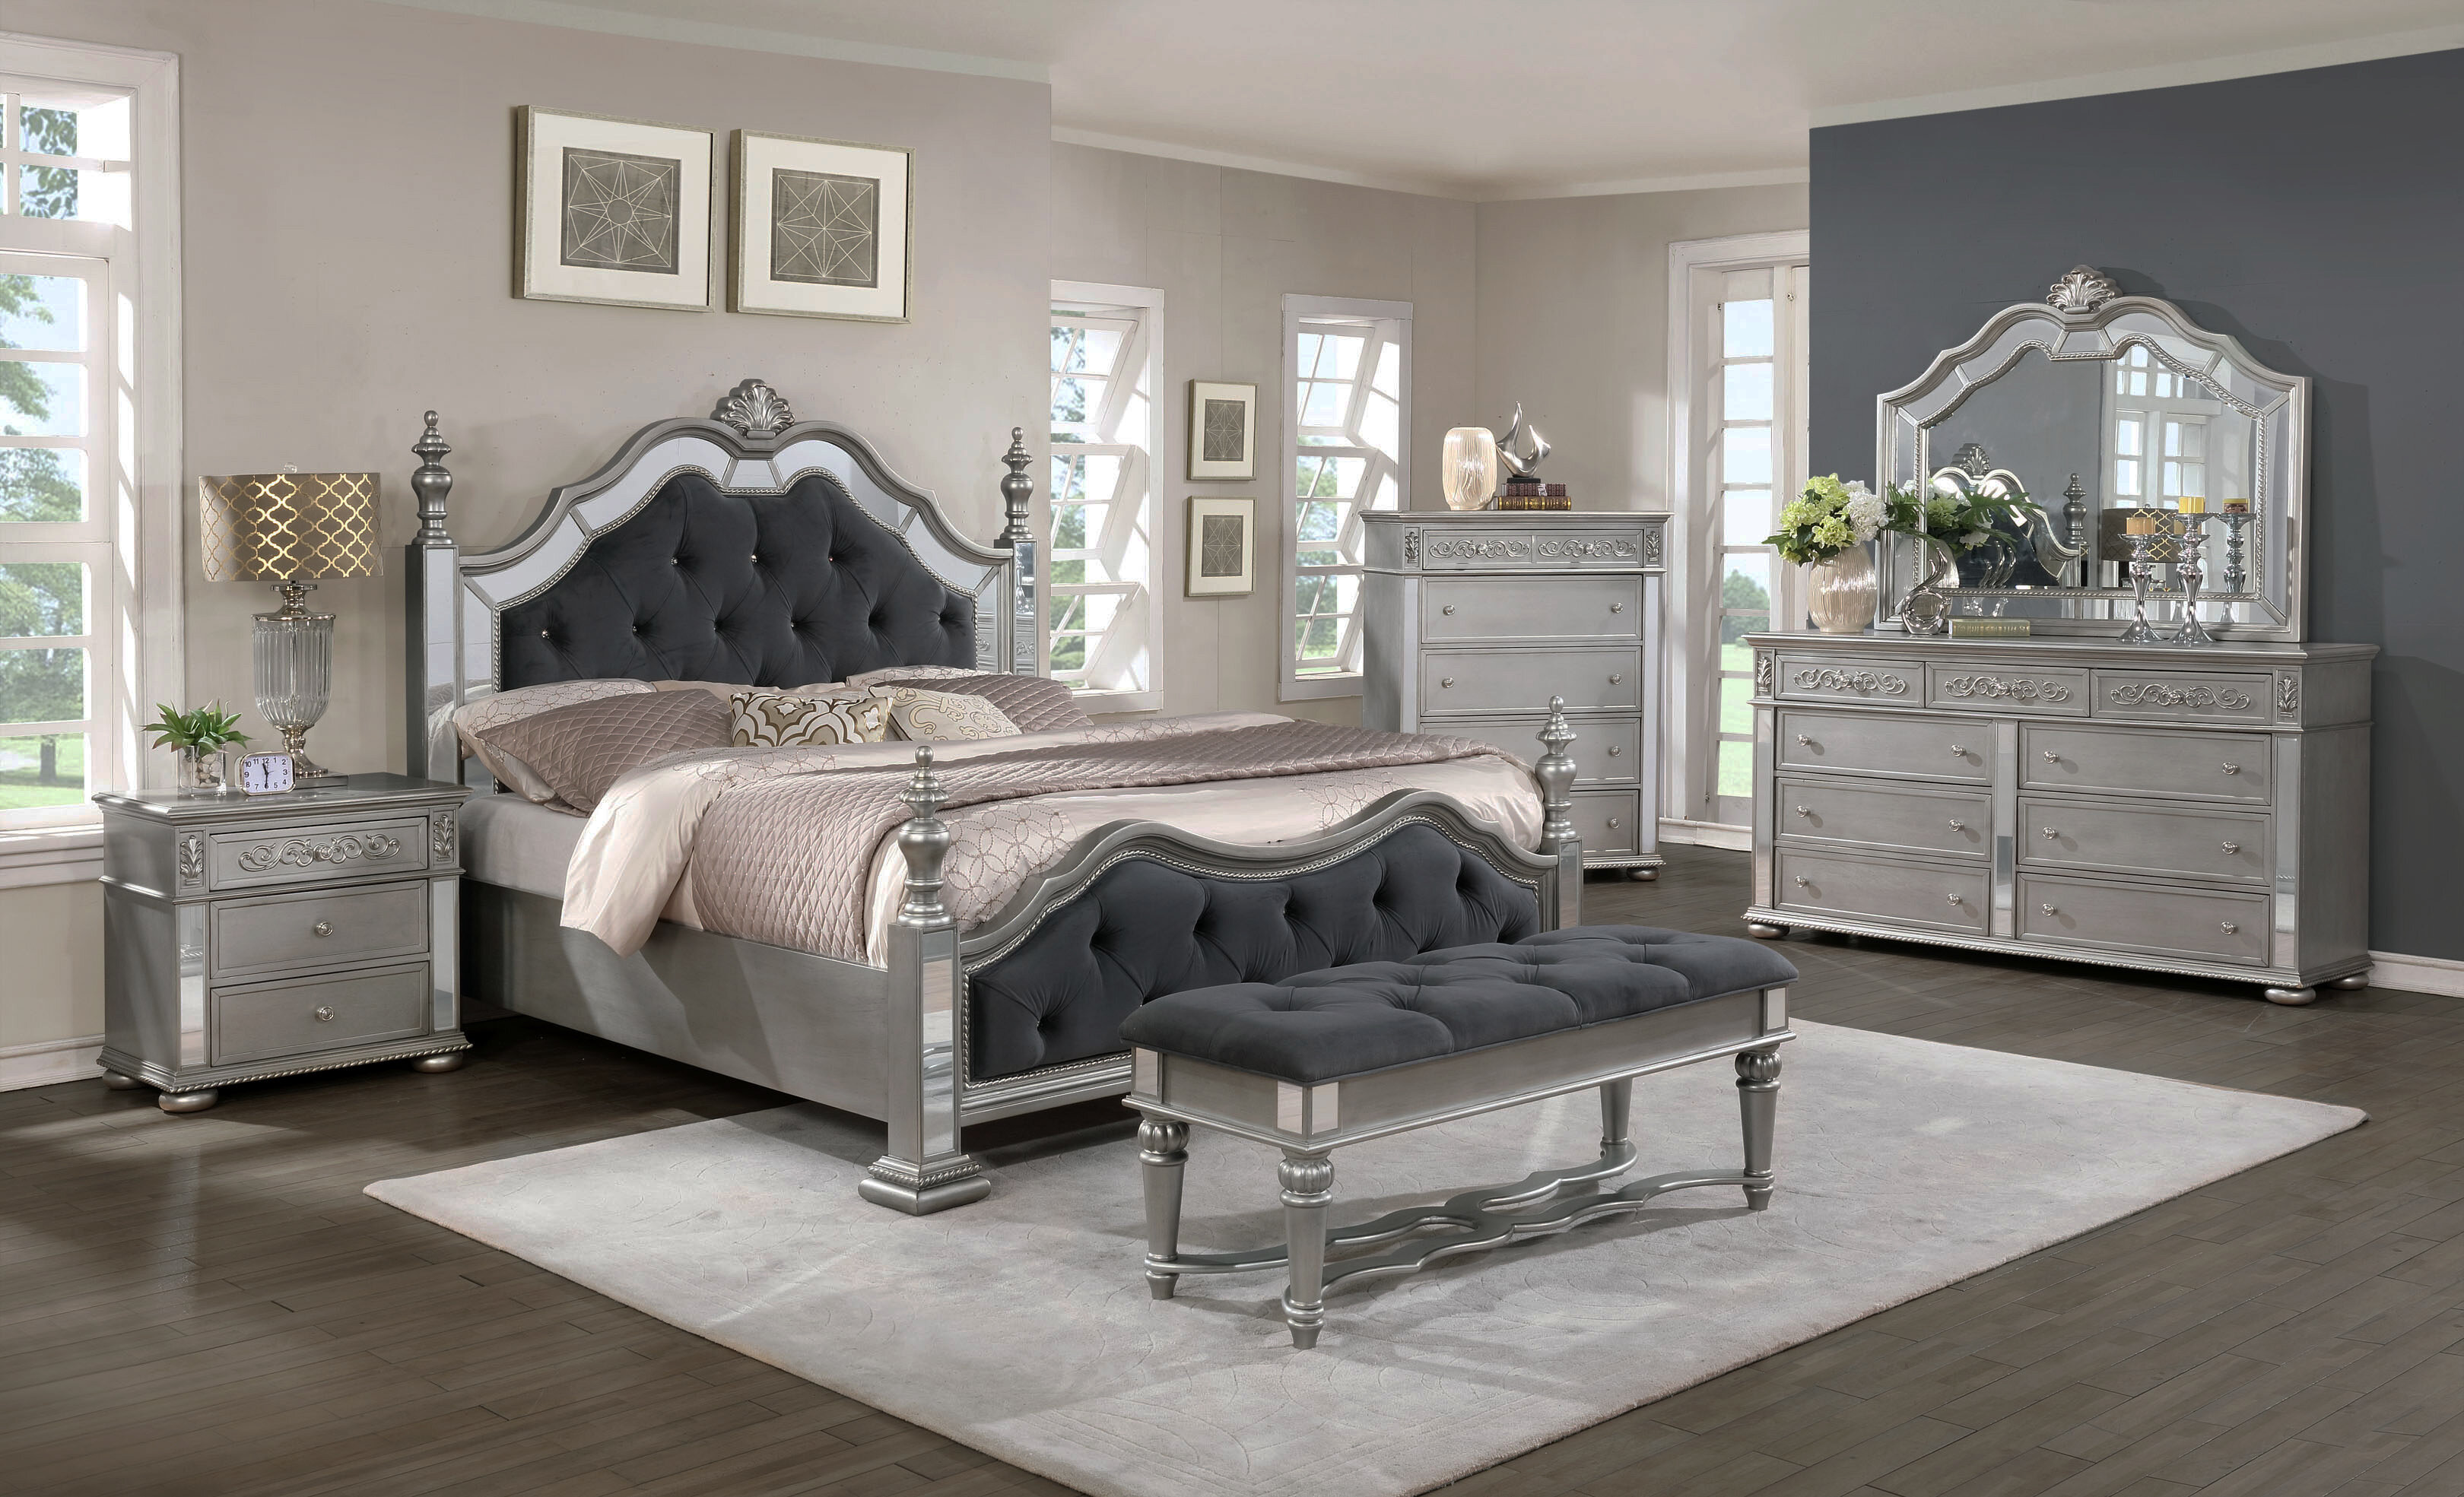 Mirrored Silver Bedroom Sets You Ll Love In 2021 Wayfair